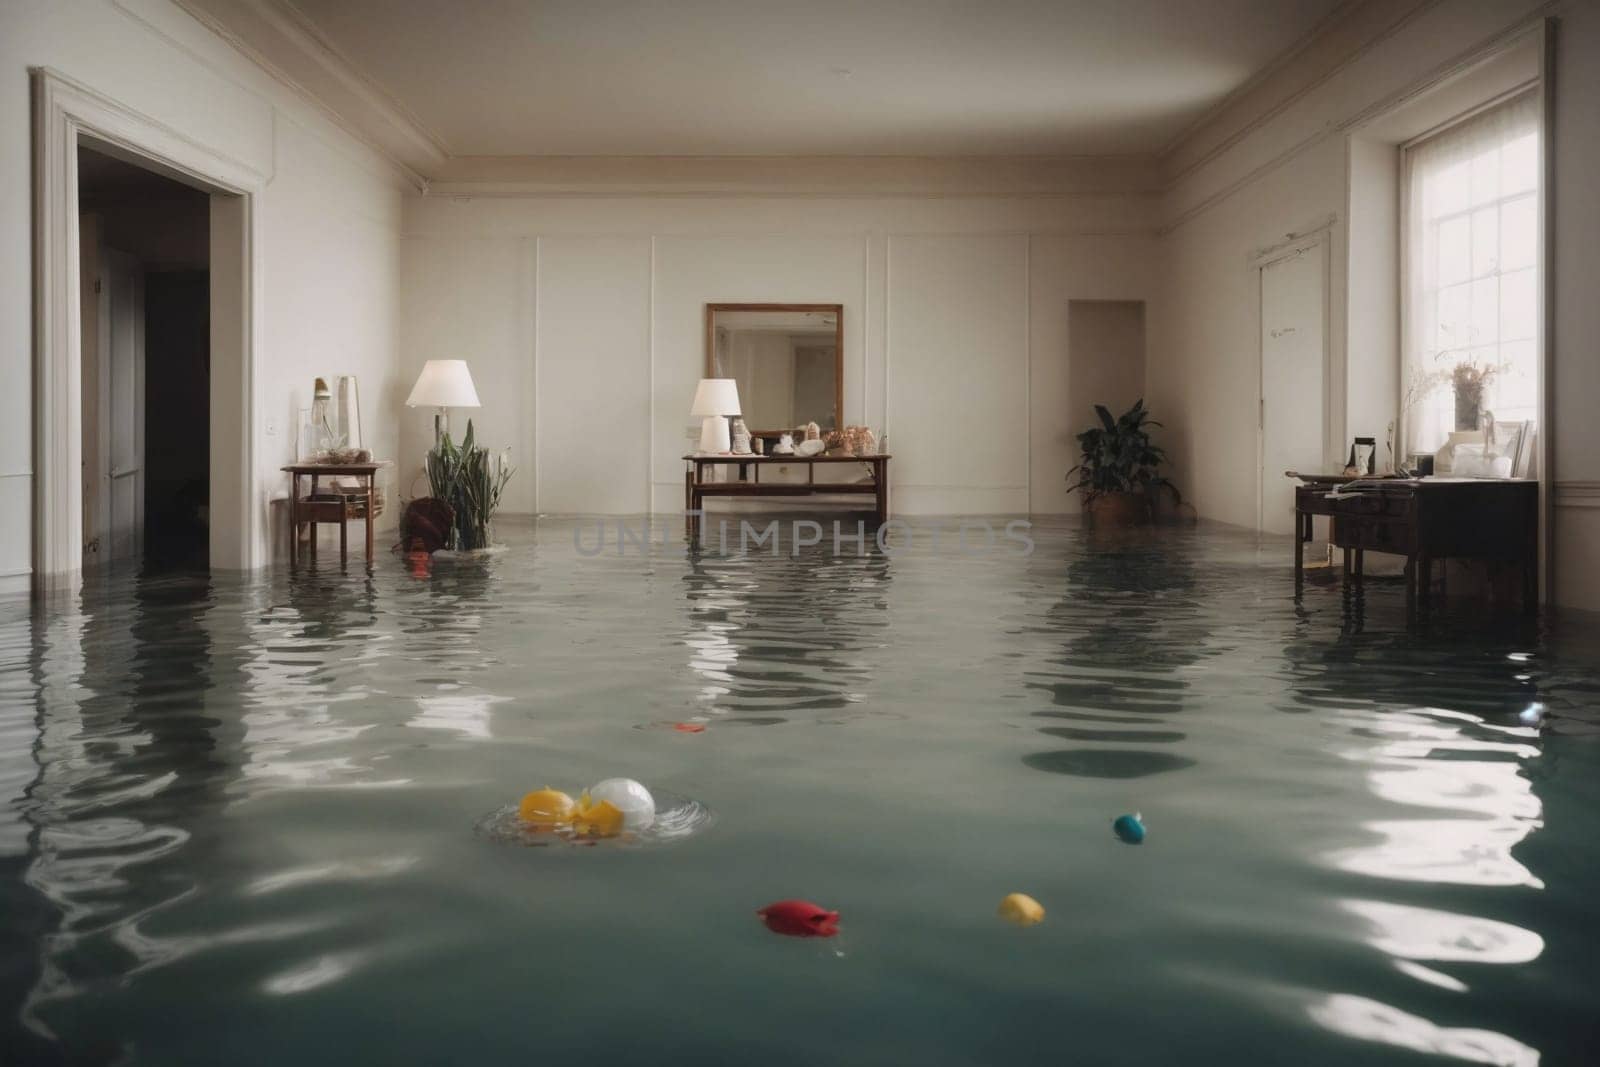 A living room filled with water, showcasing tables and chairs partially submerged due to flooding.